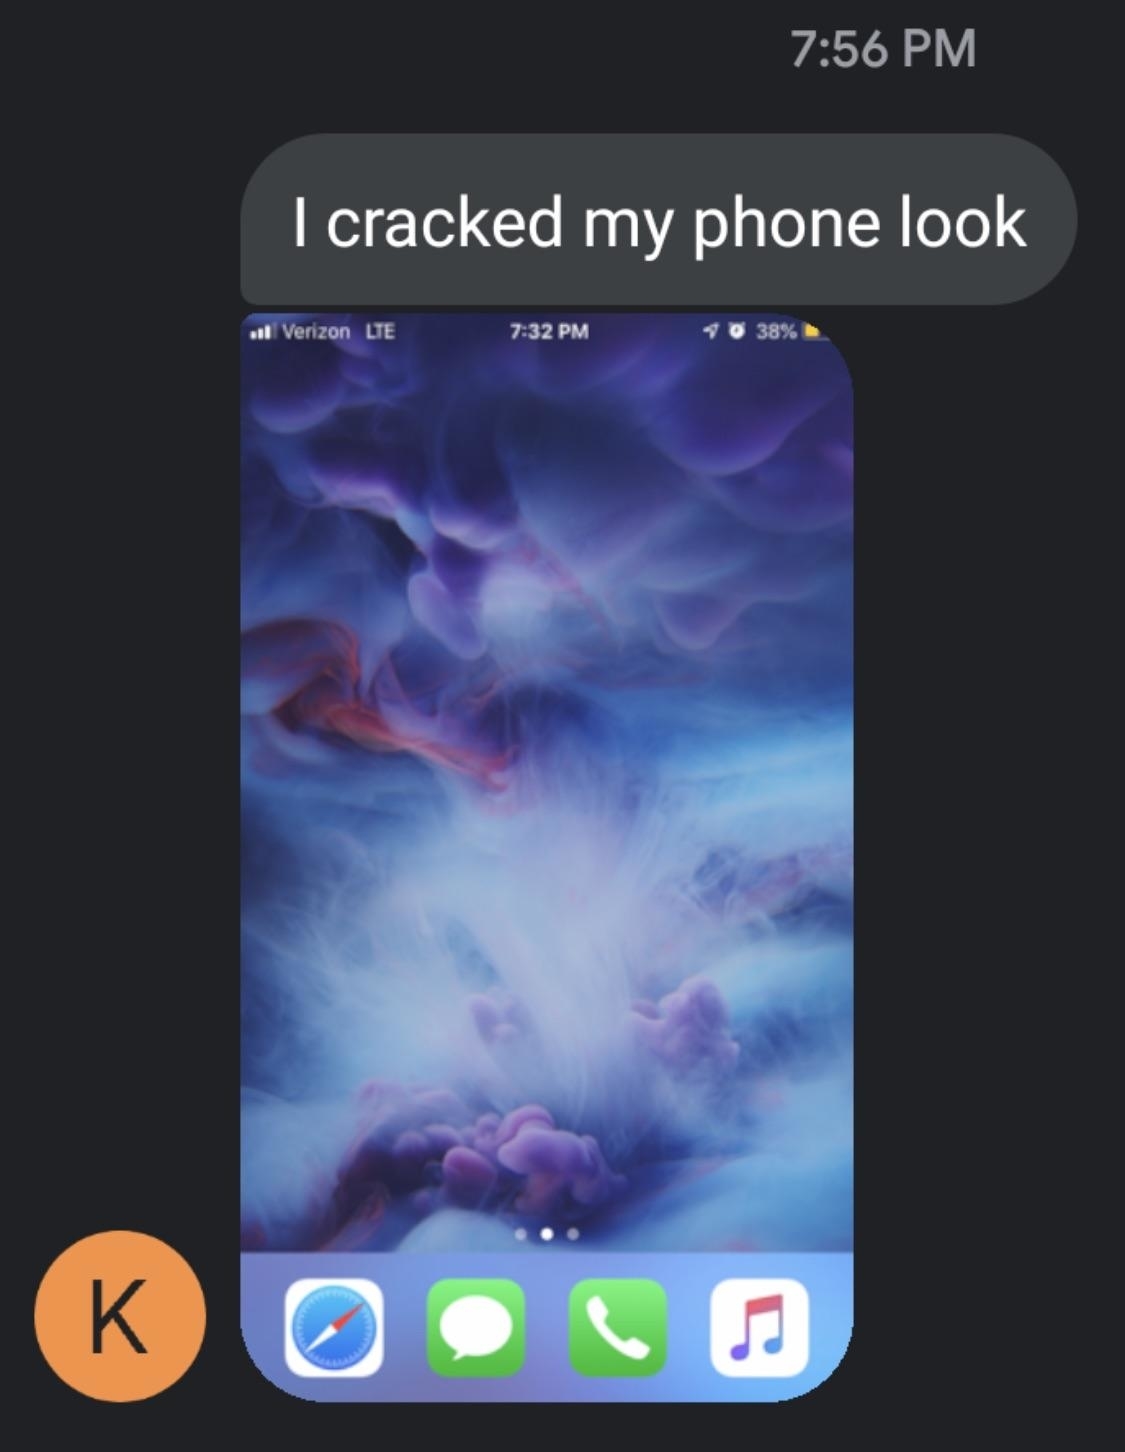 Screenshot of a smartphone&#x27;s home screen with visible icons and a celestial scene, with text message saying &quot;I cracked my phone look&quot;